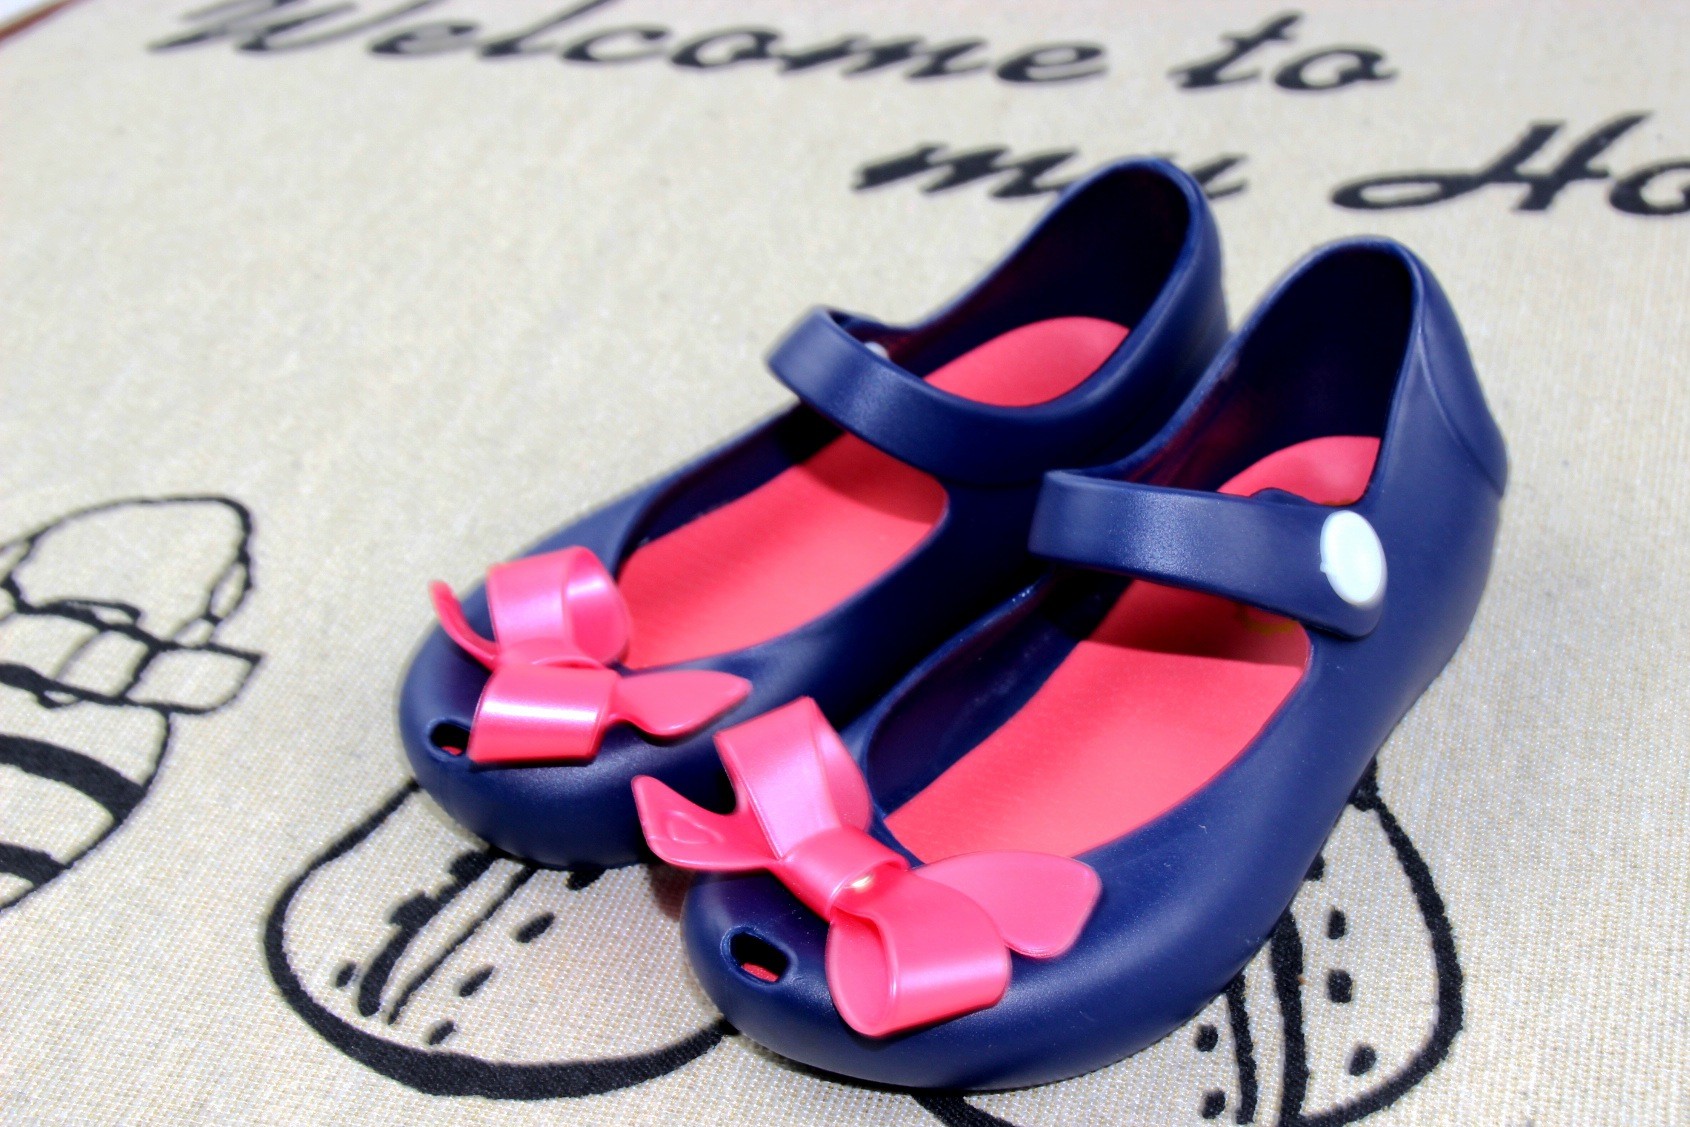 Melissa children's sandals jelly l shoes with bow tie are exported to China